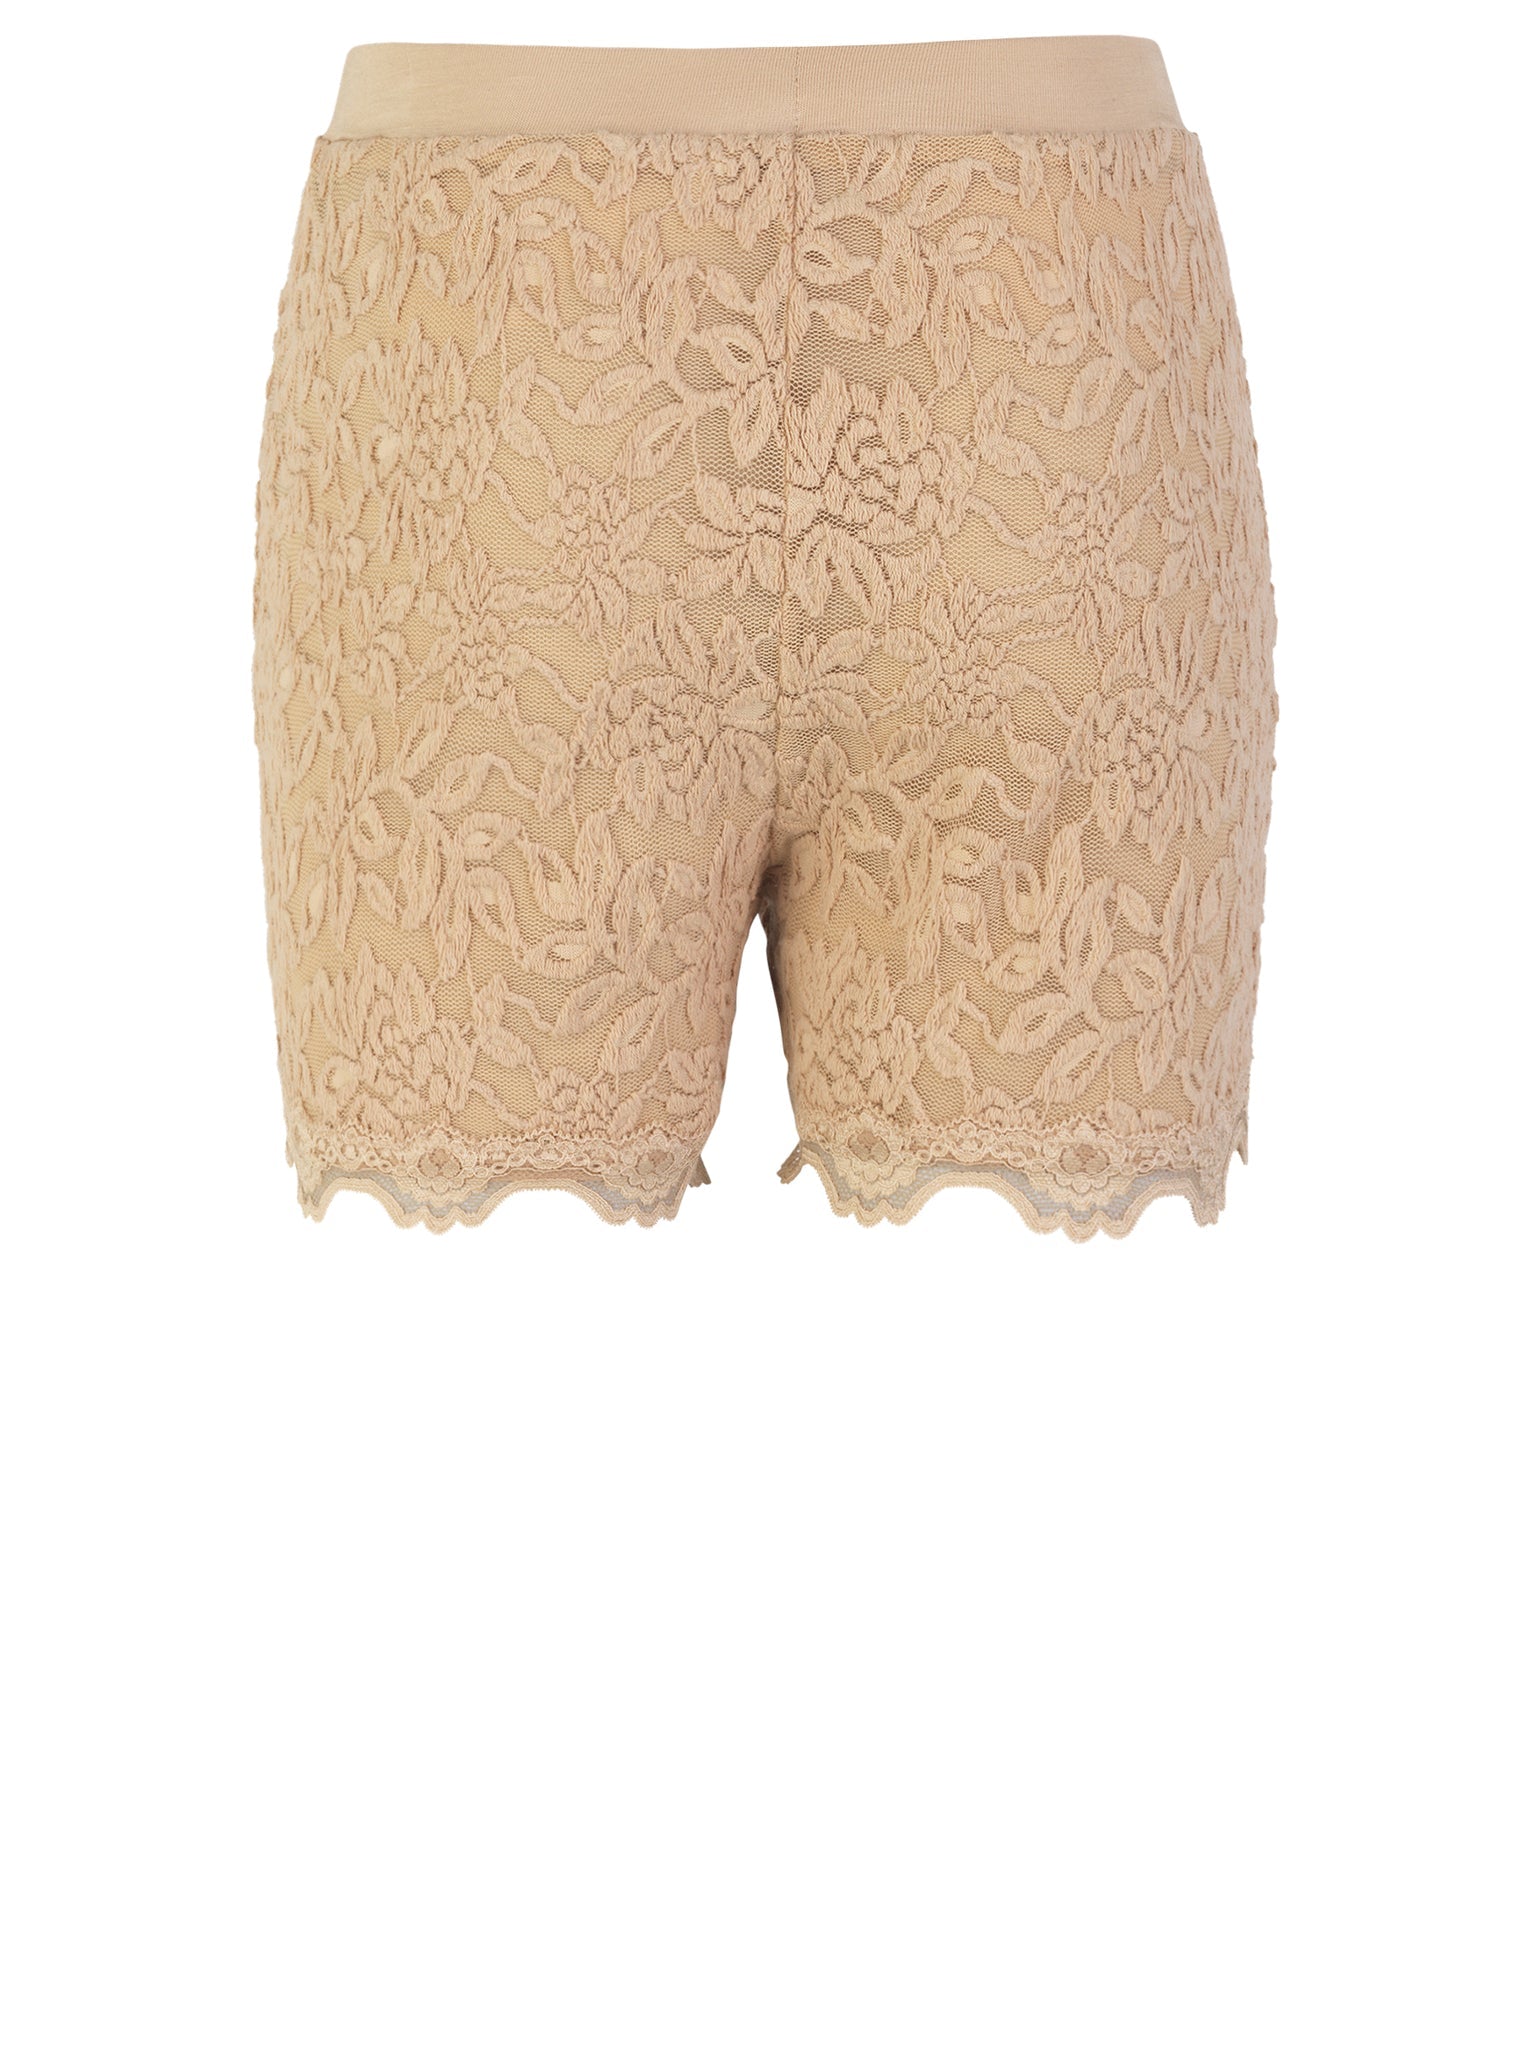 Lace shorts for girls